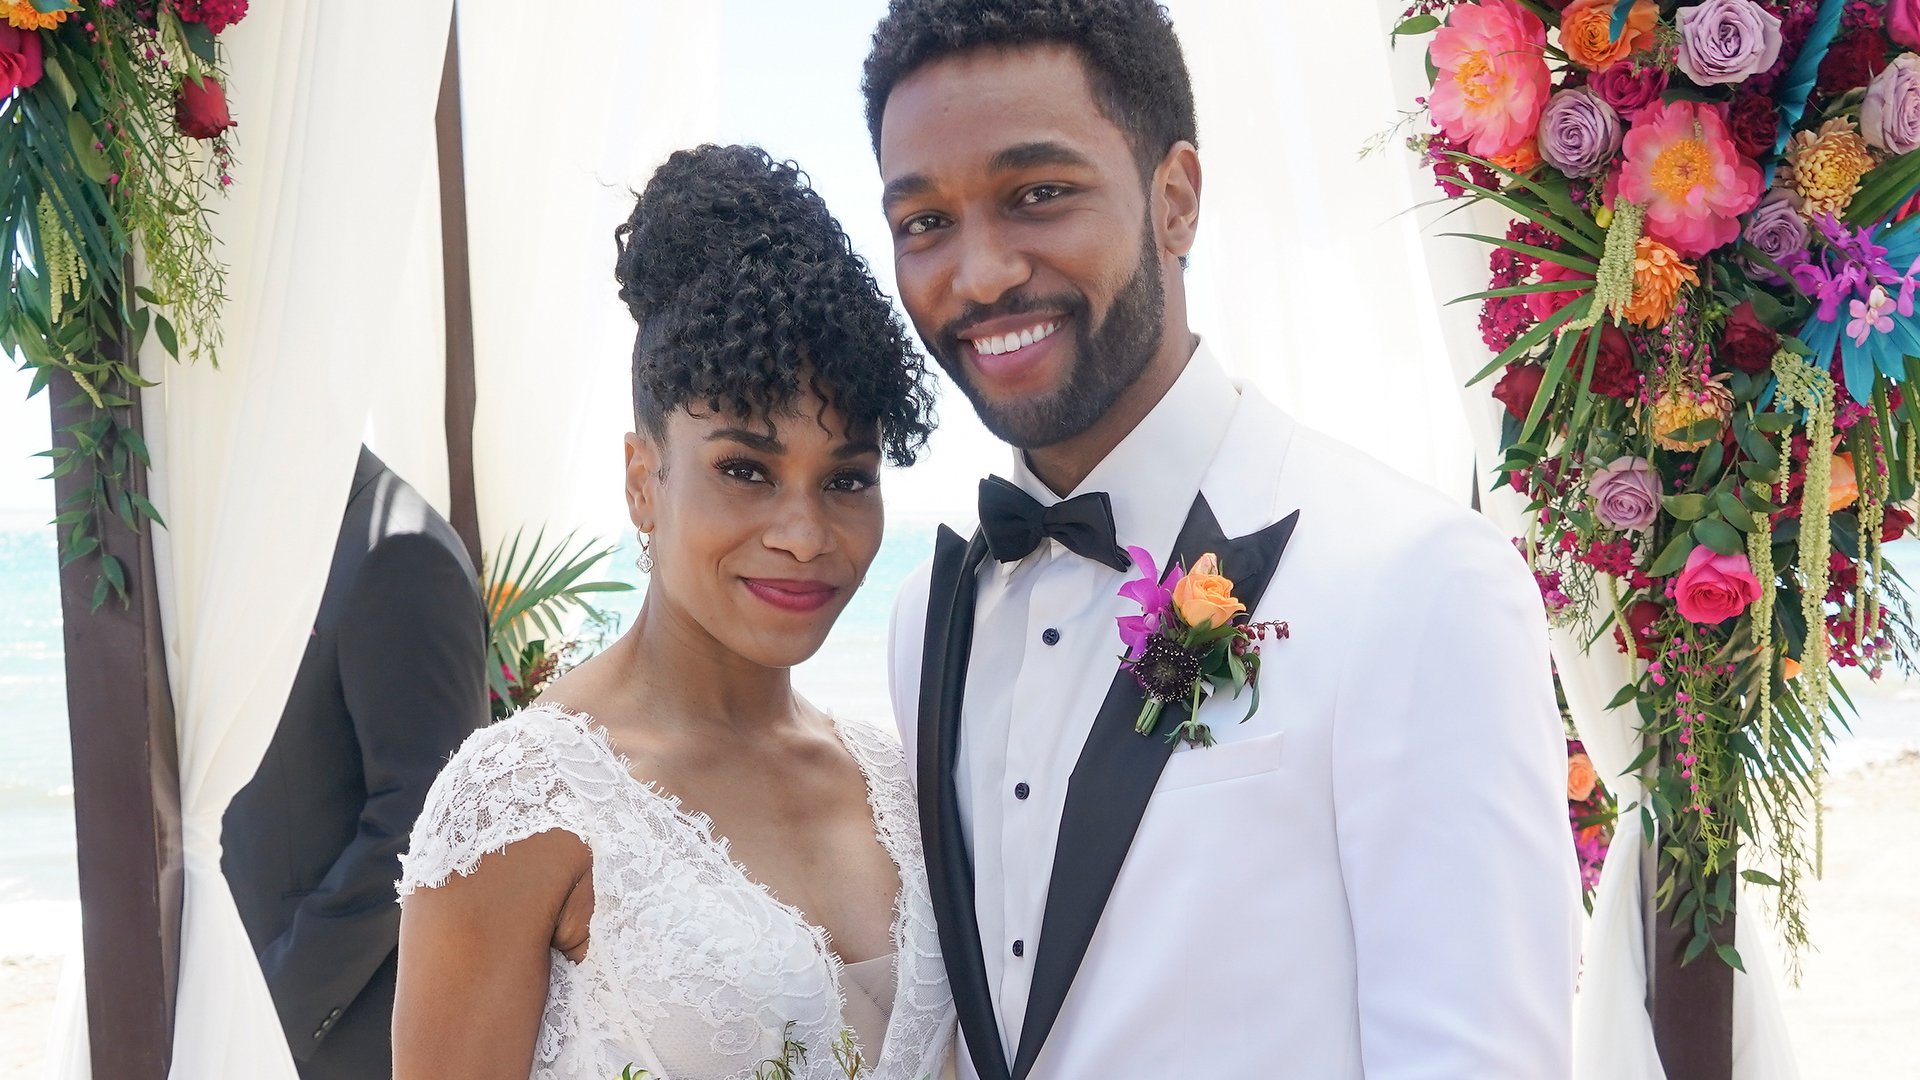 Kelly McCreary as Maggie and Anthony Hill as Winston getting married in the ‘Grey’s Anatomy’ Season 17 finale